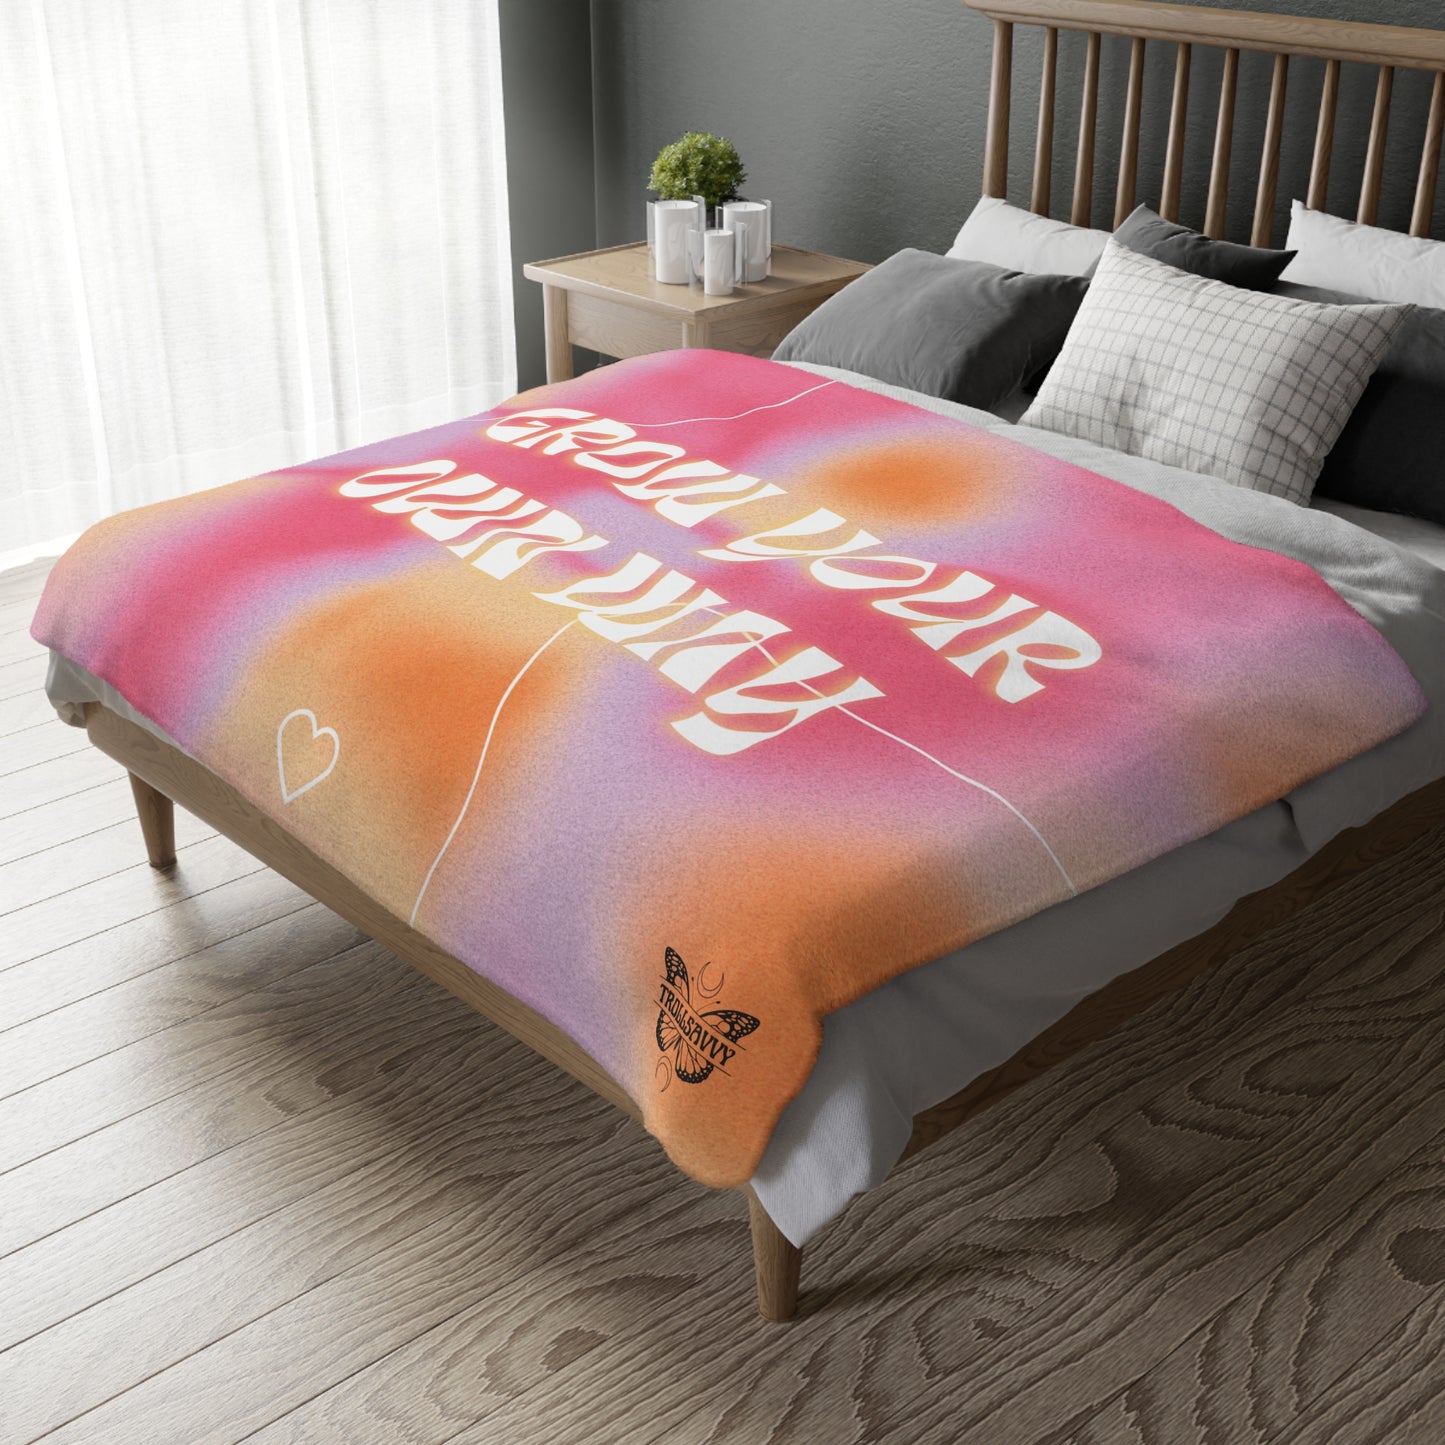 Grow Your Own Way Double-Sided Mantra Blanket